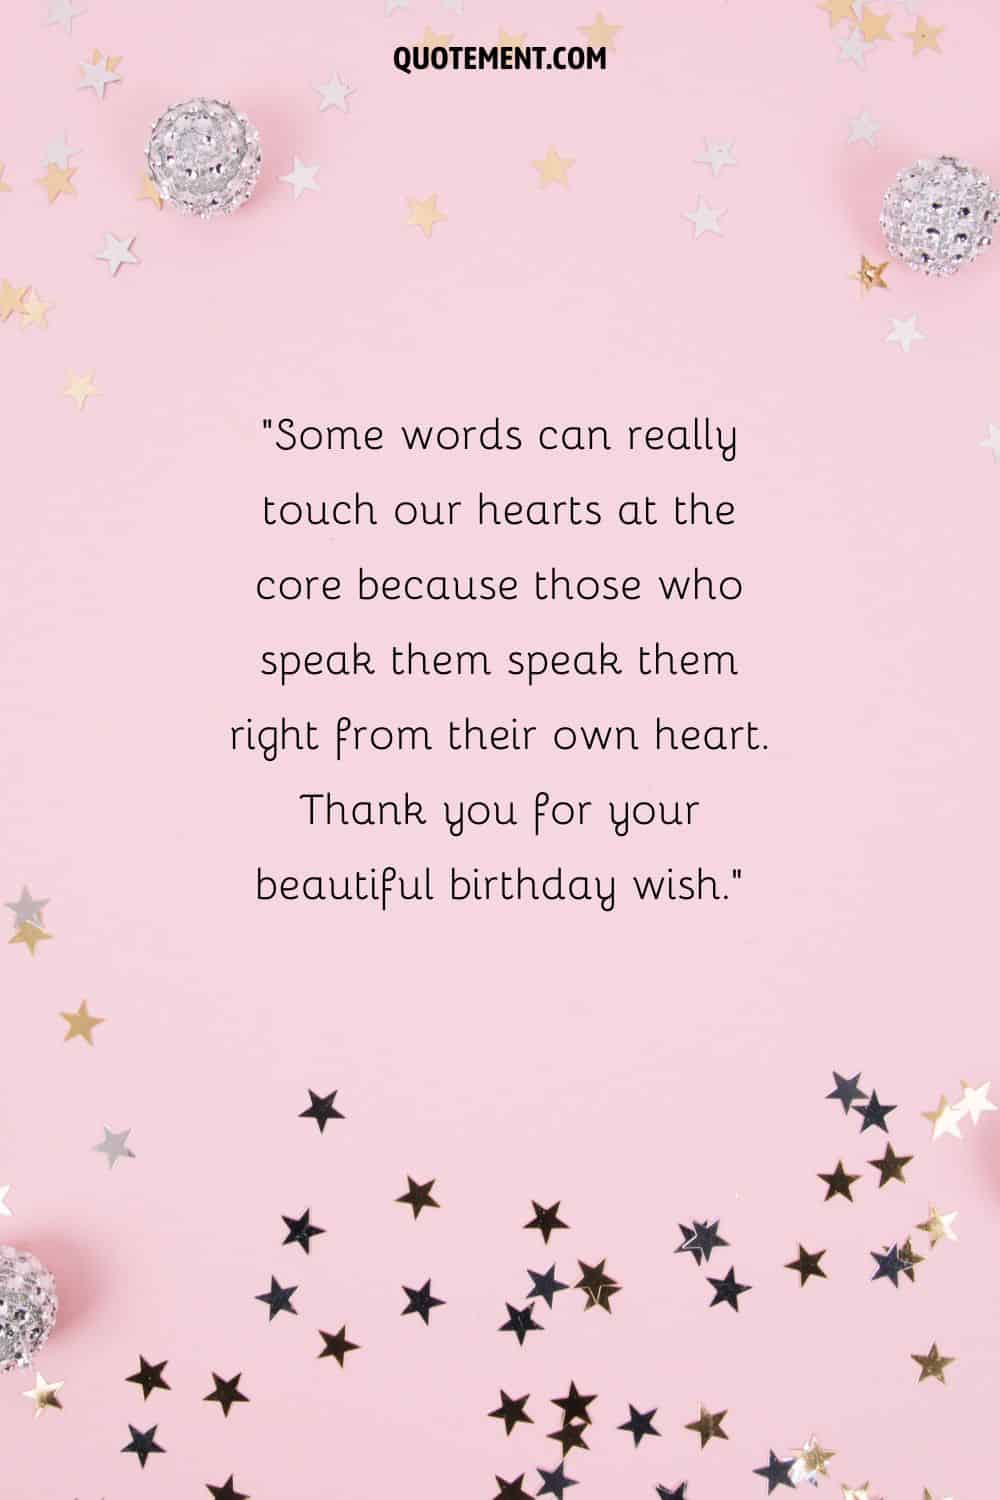 little stars image representing the best way to say thank you for birthday wishes
